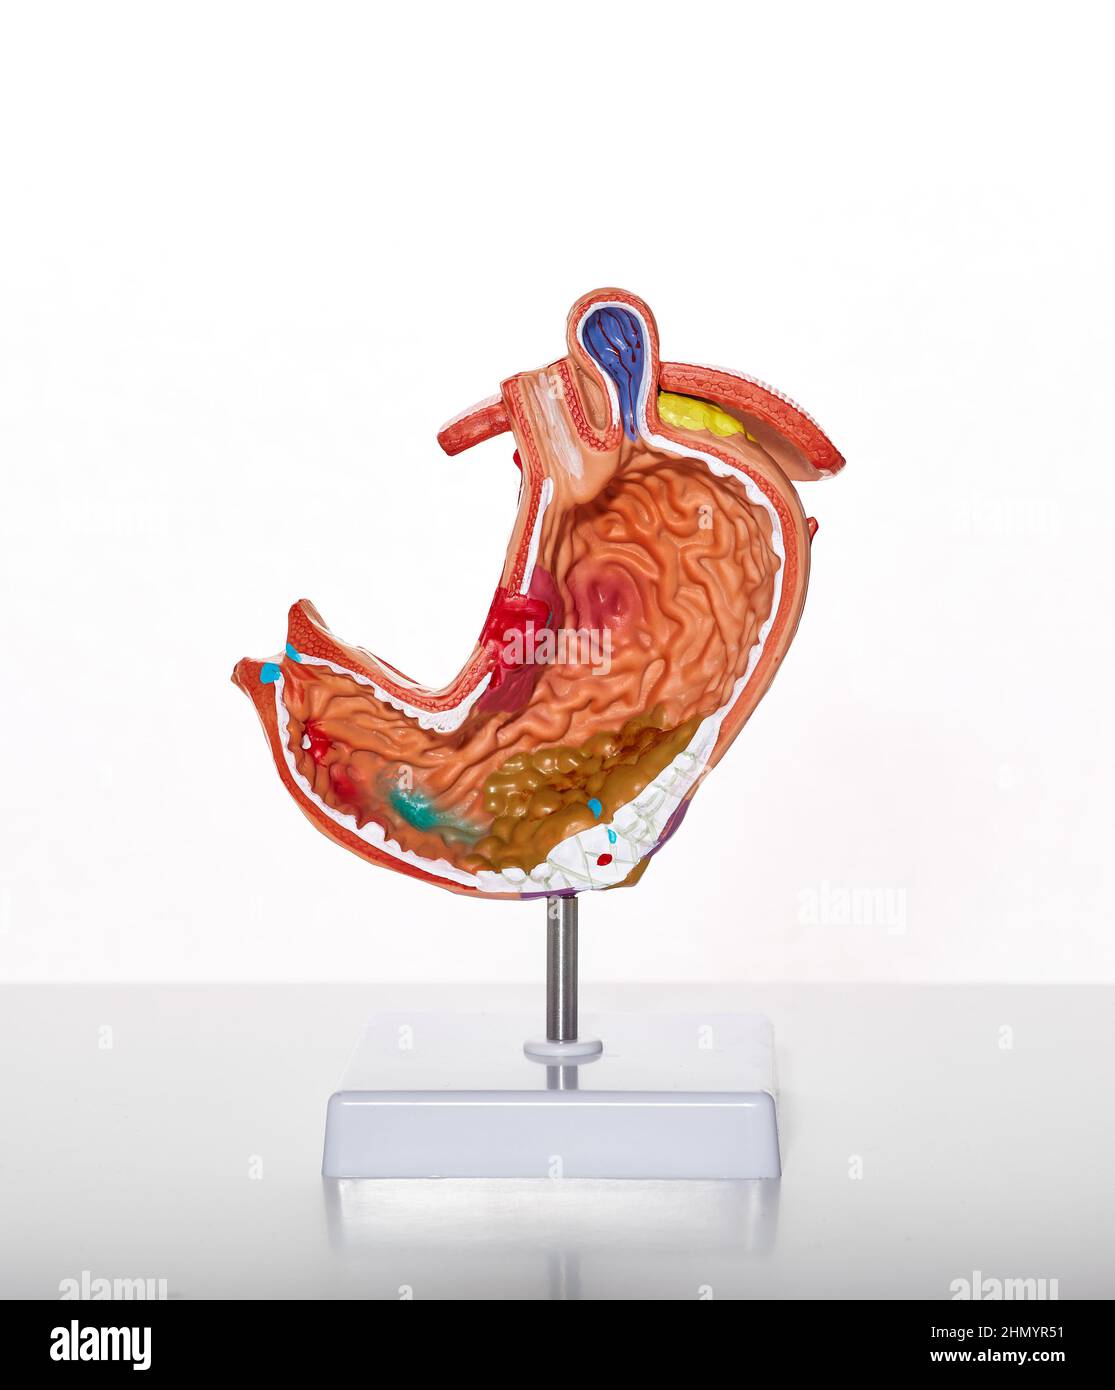 Visual anatomical model of stomach showing stomach pathologies and disease, ulcer and gastritis for medical education, close-up Stock Photo